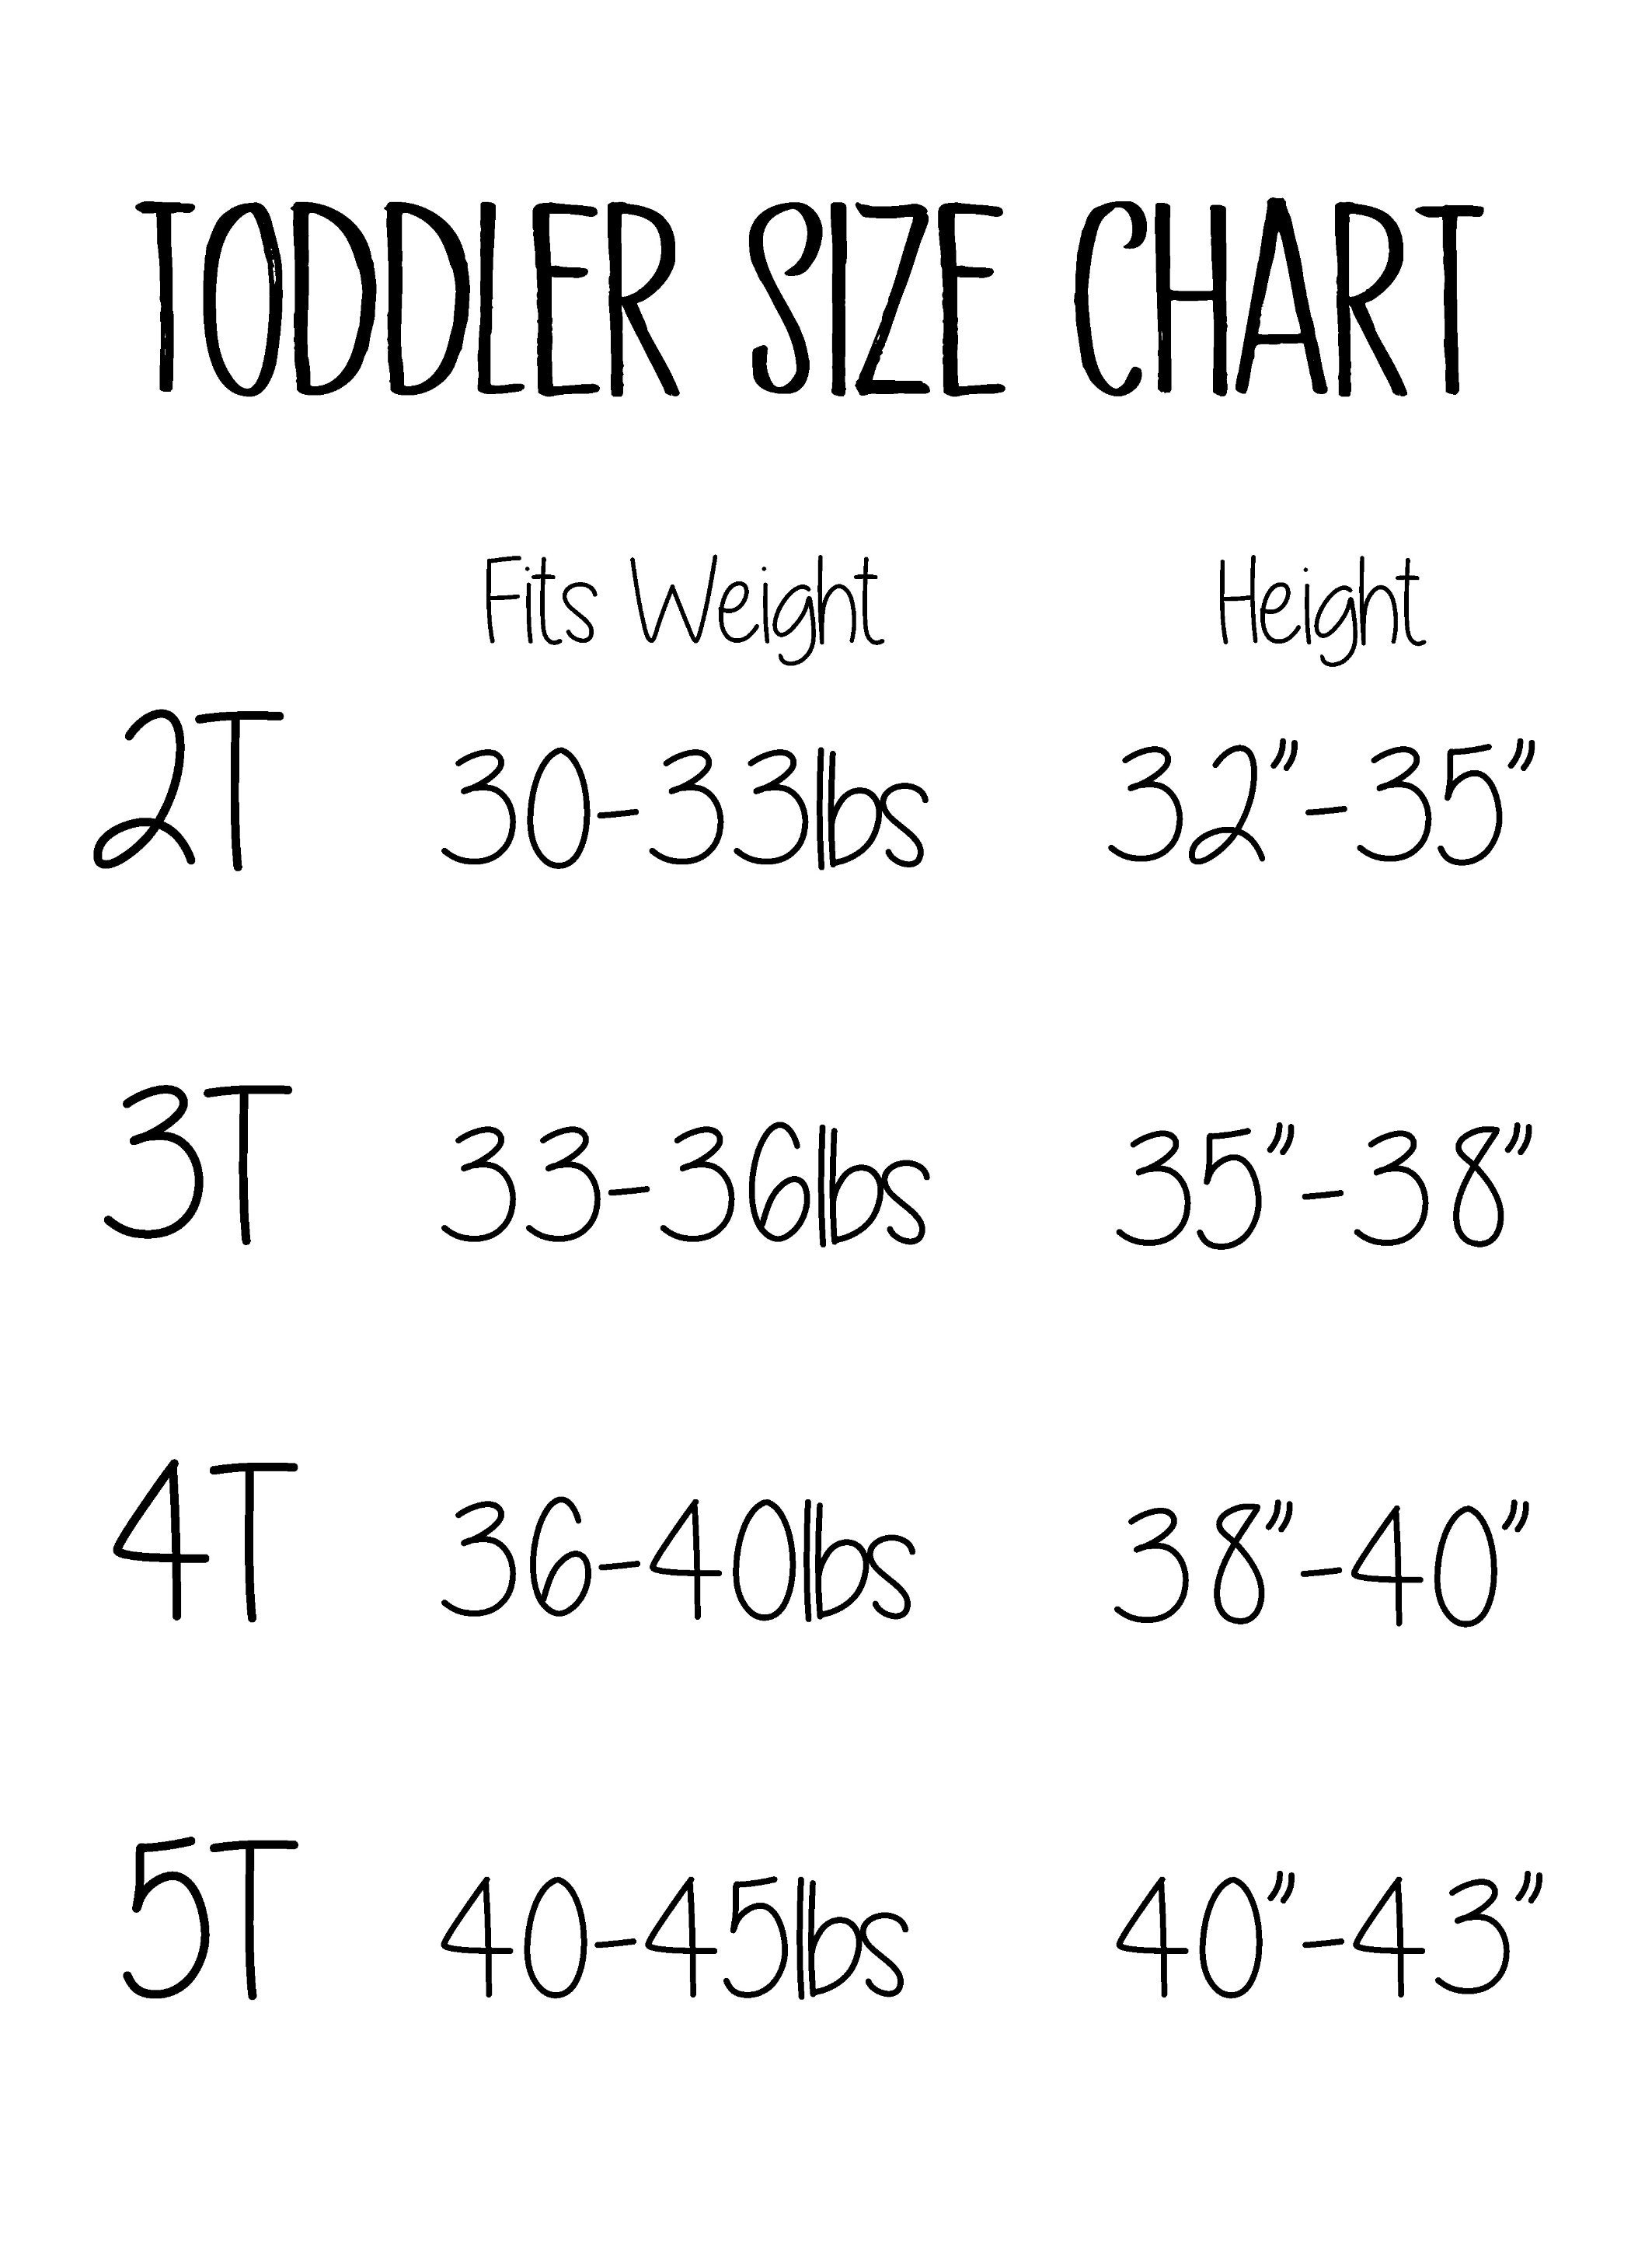 Bella Canvas Toddler Size Chart